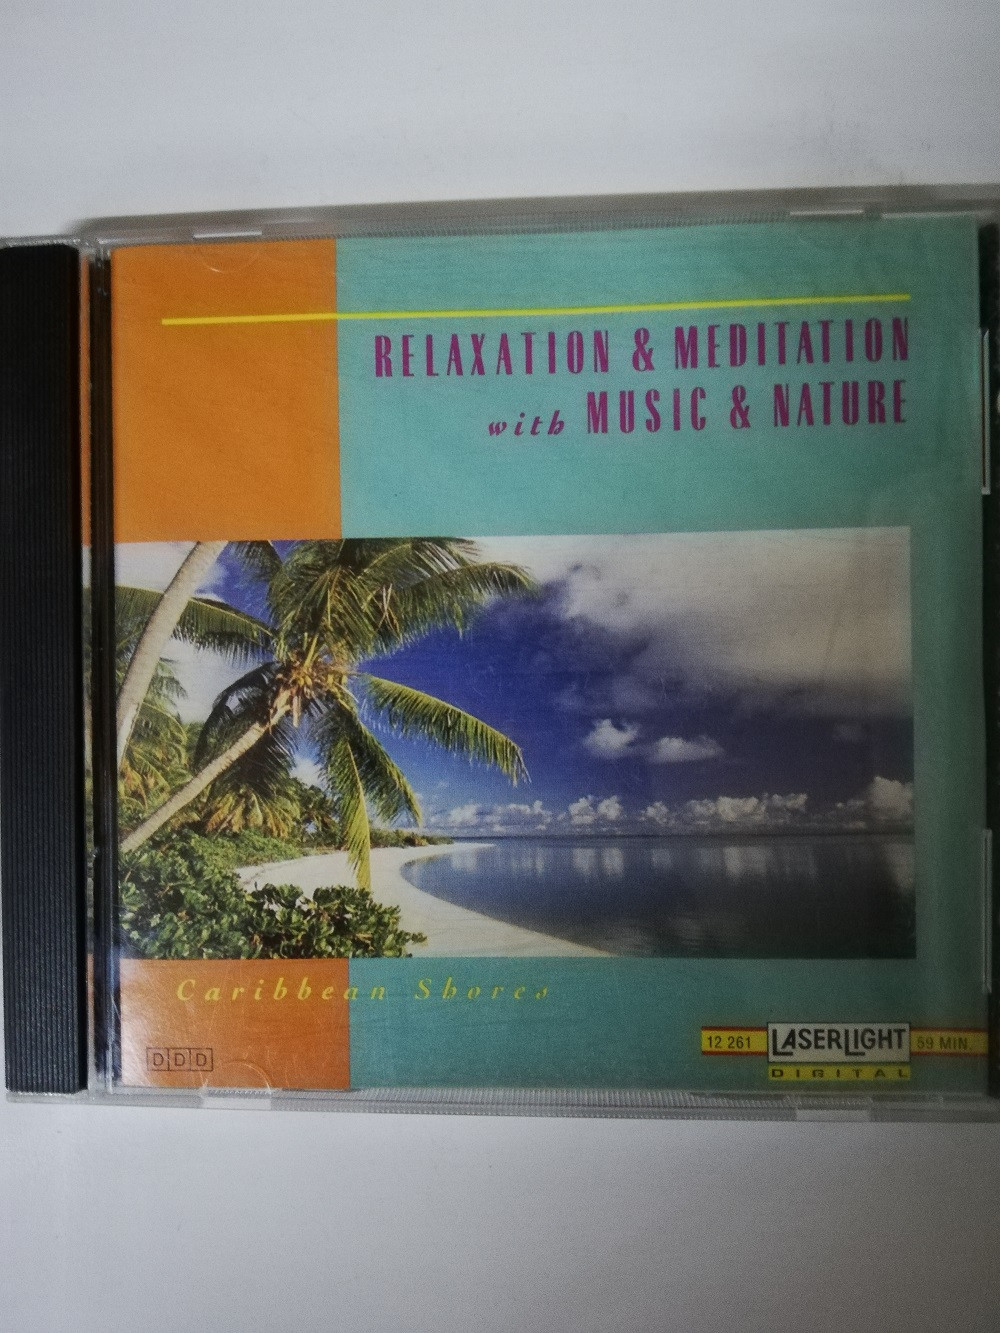 Imagen CD RELAXATION & MEDITATION WITH MUSIC & NATURE